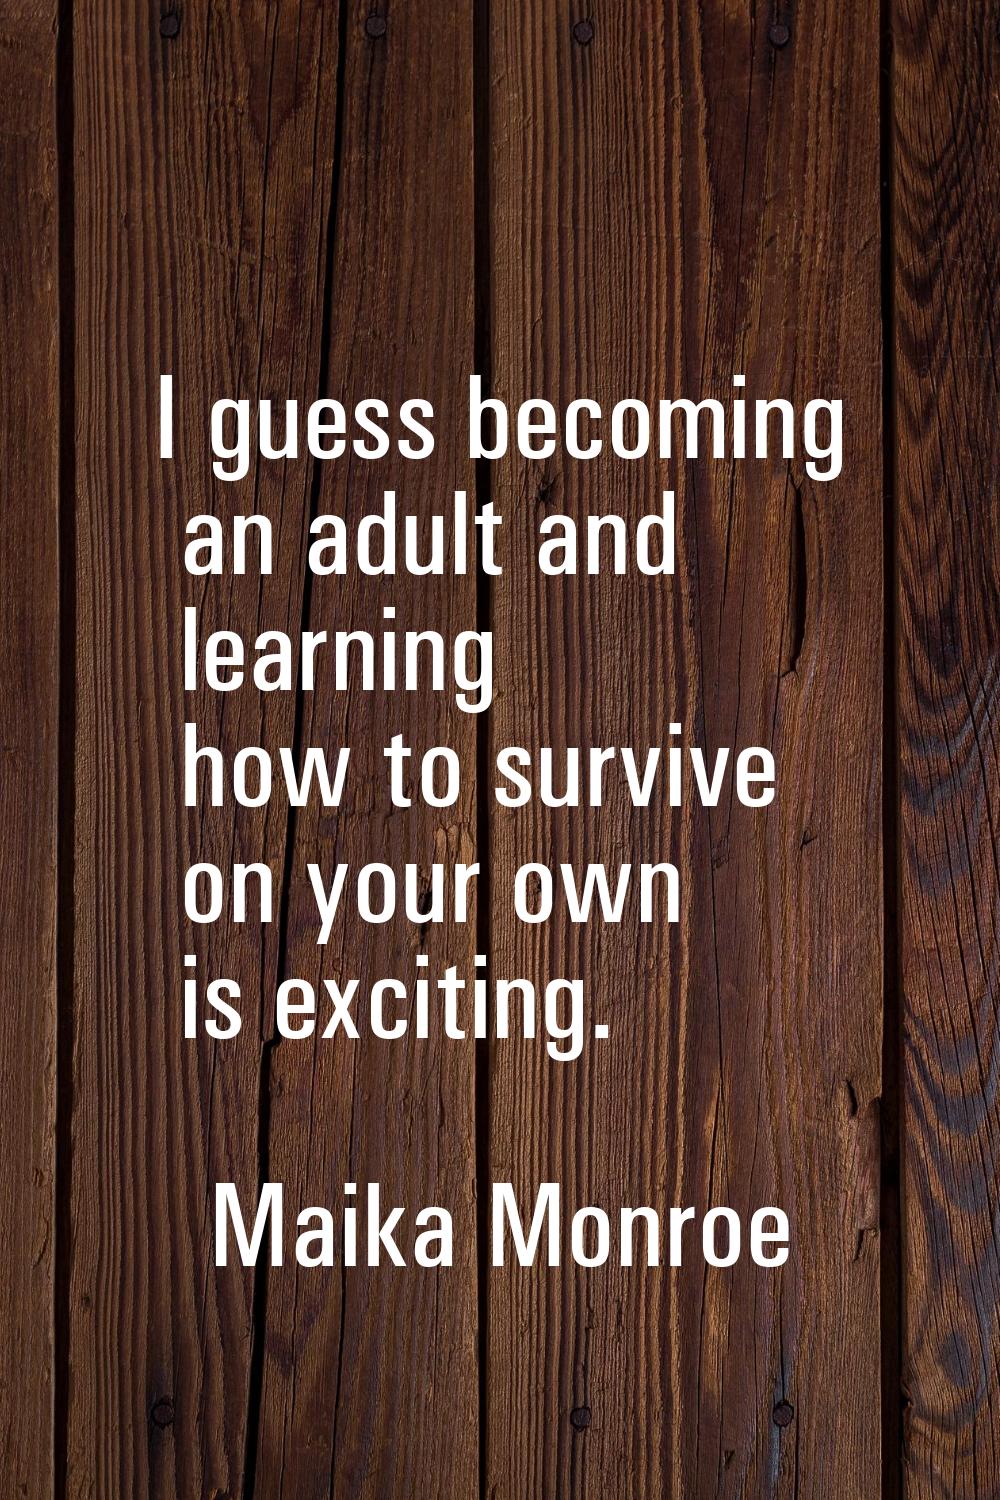 I guess becoming an adult and learning how to survive on your own is exciting.